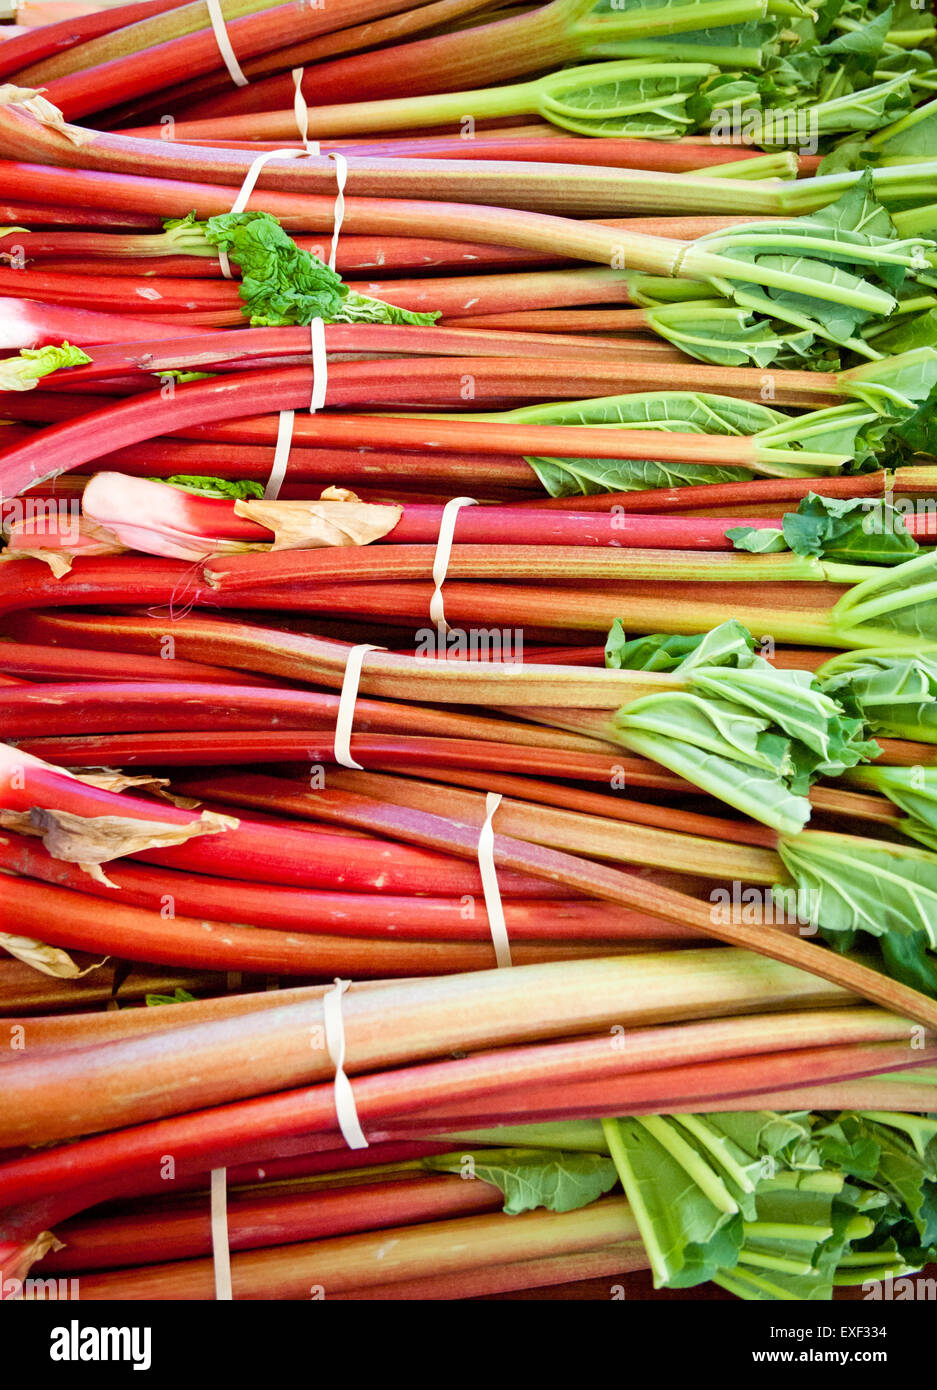 Rhubarb bunches for sale at the Old Strathcona Farmers' Market in Edmonton, Alberta, Canada. Stock Photo